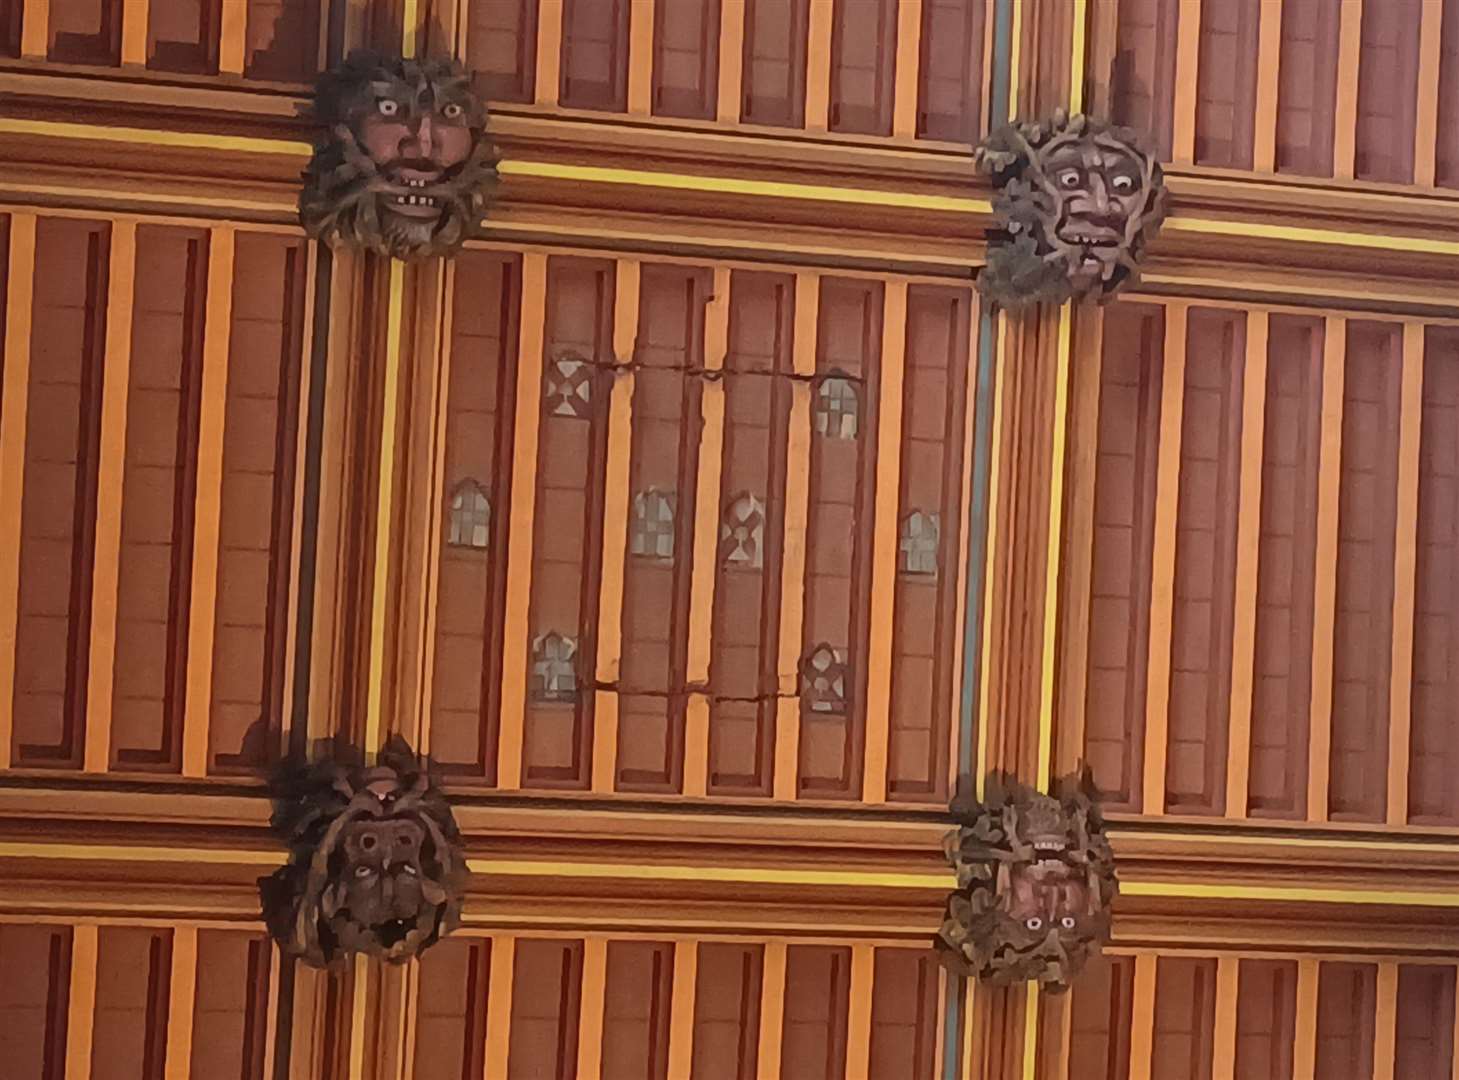 The Green Men carved into the ceiling in The Crossing